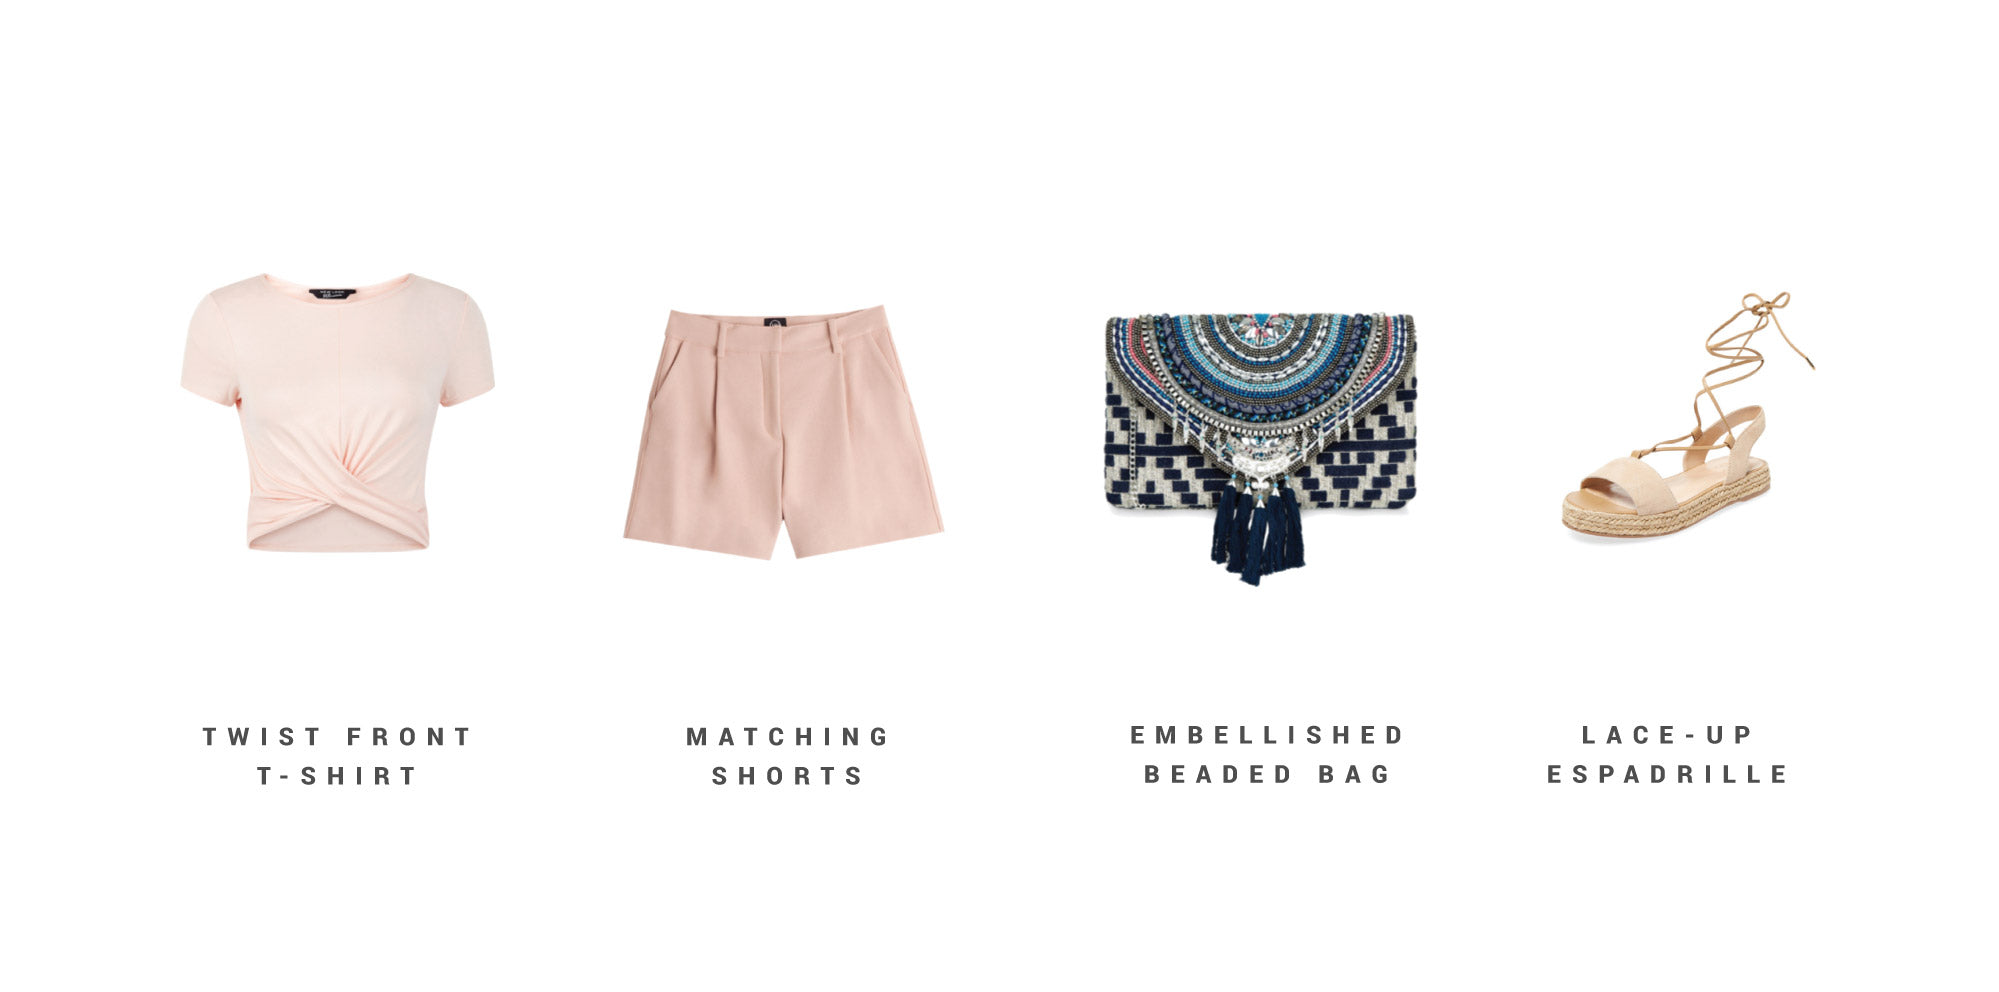 Greece Travel Essentials. Encircled creates versatile minimalist clothes with the everyday traveler in mind. Each piece is Made in Canada, out of sustainable, and eco friendly materials.